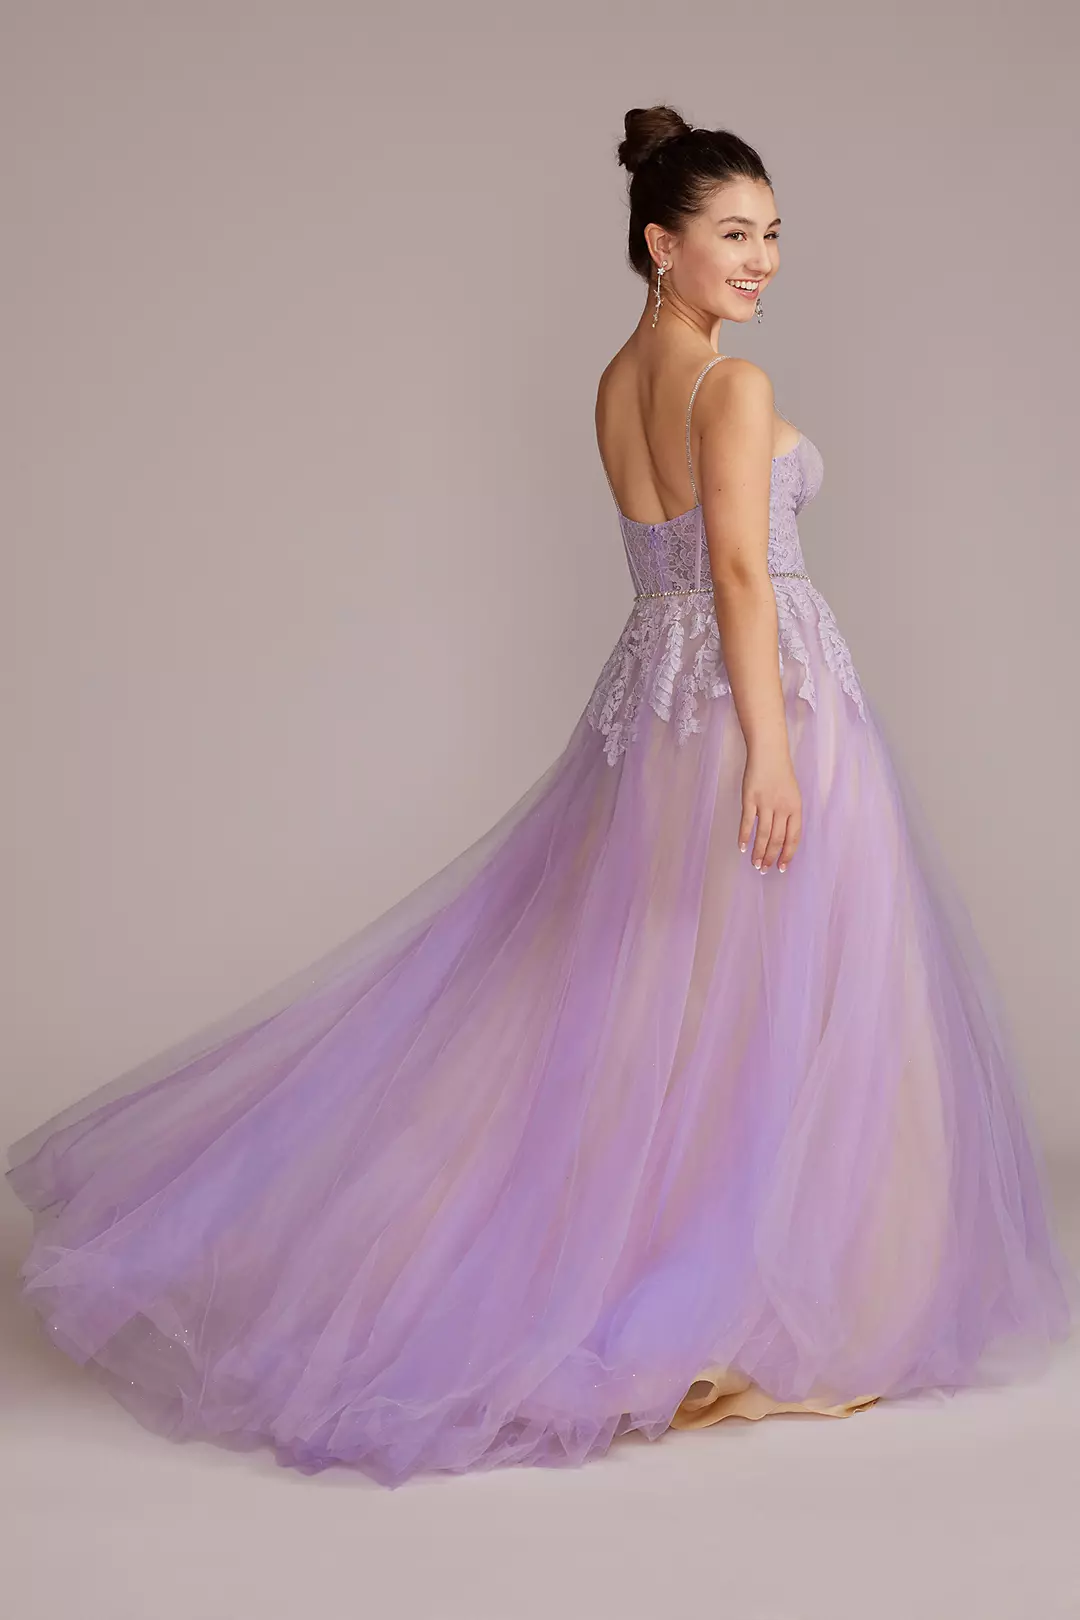 Tulle Ball Gown with Illusion Lace Corset Image 2